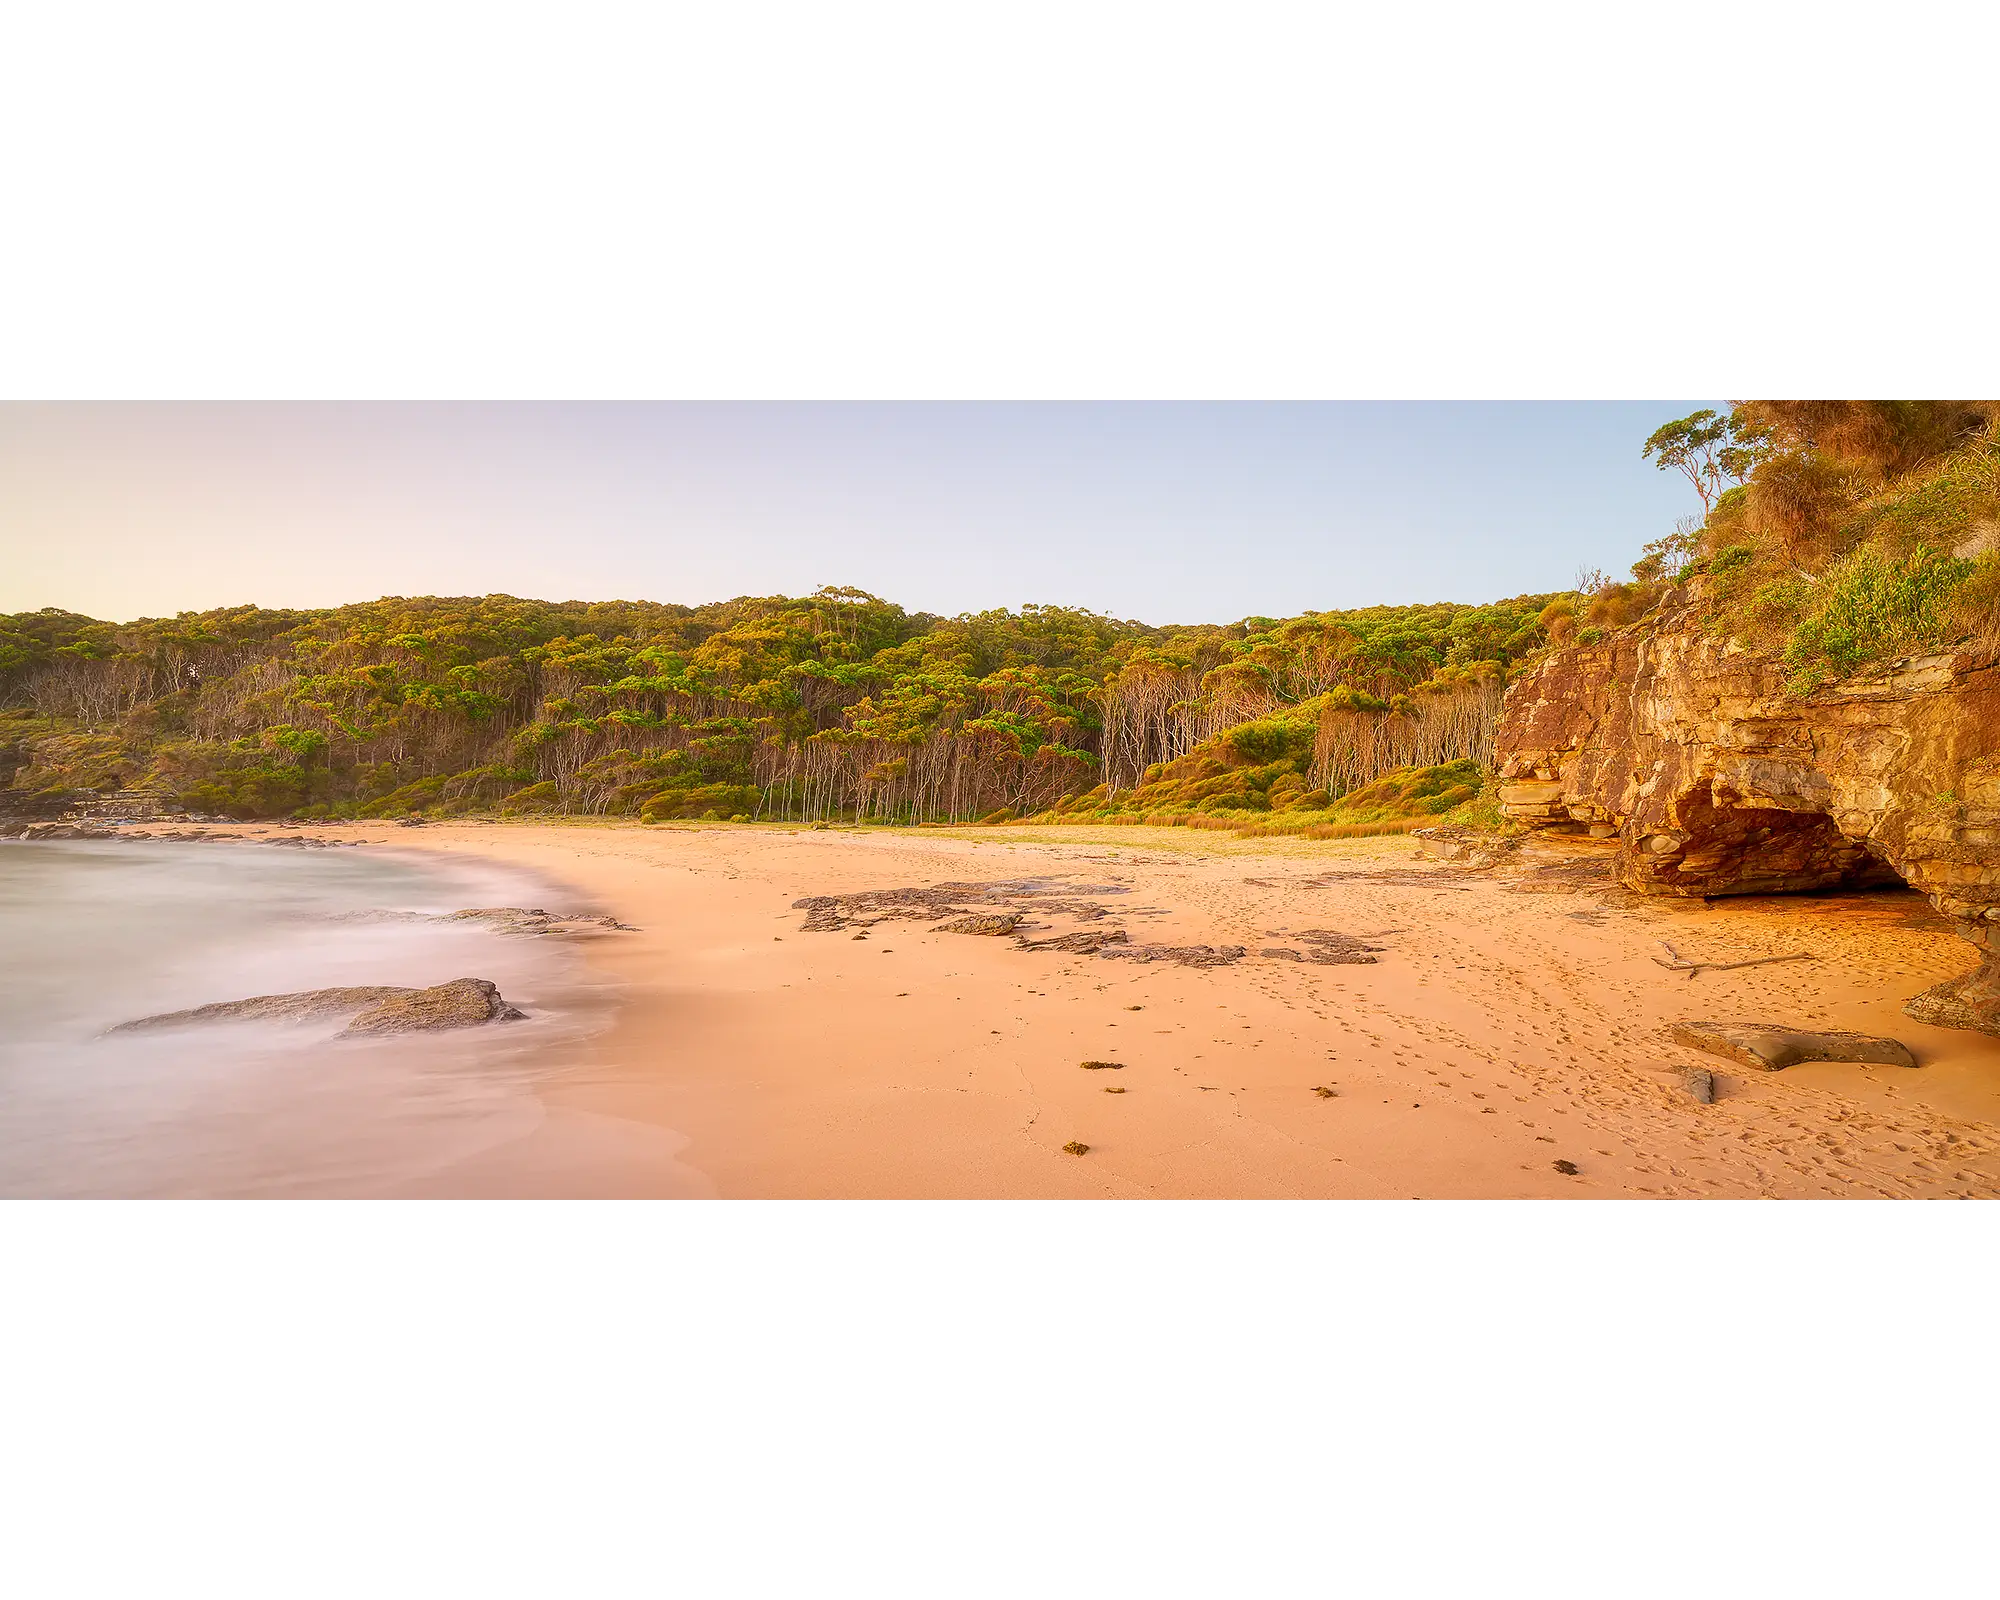 Miller Chill - Sunrise at Emily Miller Beach, South Coast, New South Wales, Australia.